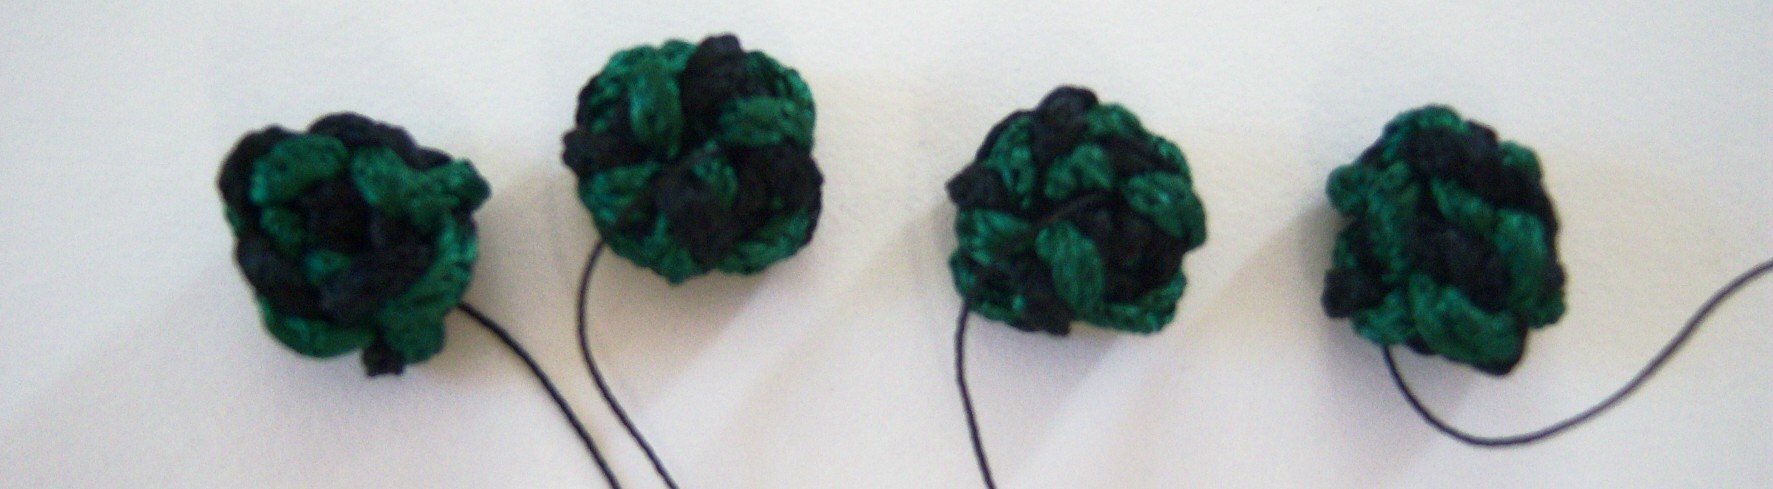 Chinese Knot Button Black/Emerald Green